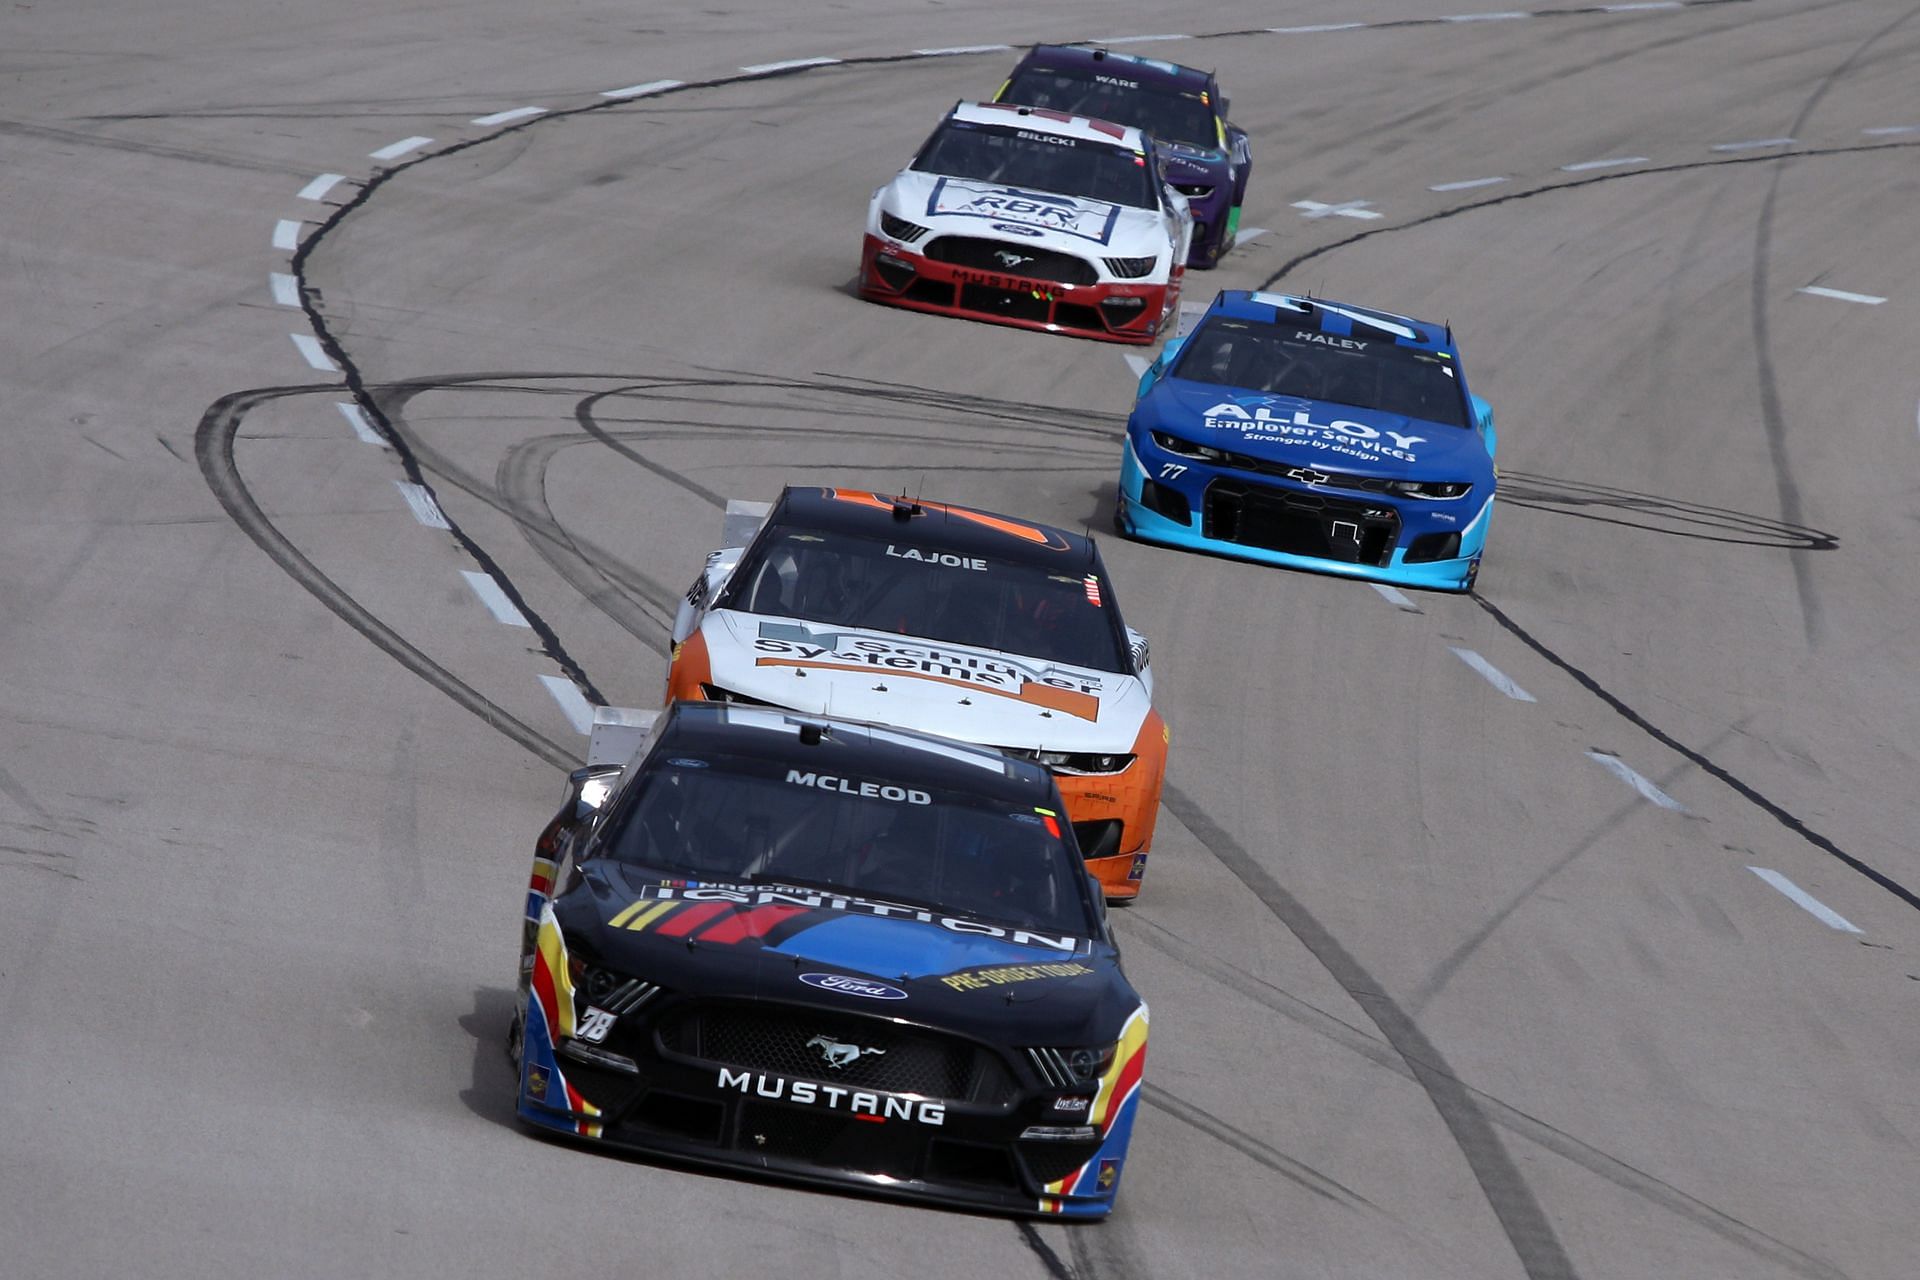 NASCAR 2022 Where to watch AutoTrader EchoPark Automotive 500 at Texas Motor Speedway race? Time, TV Schedule and Live Stream